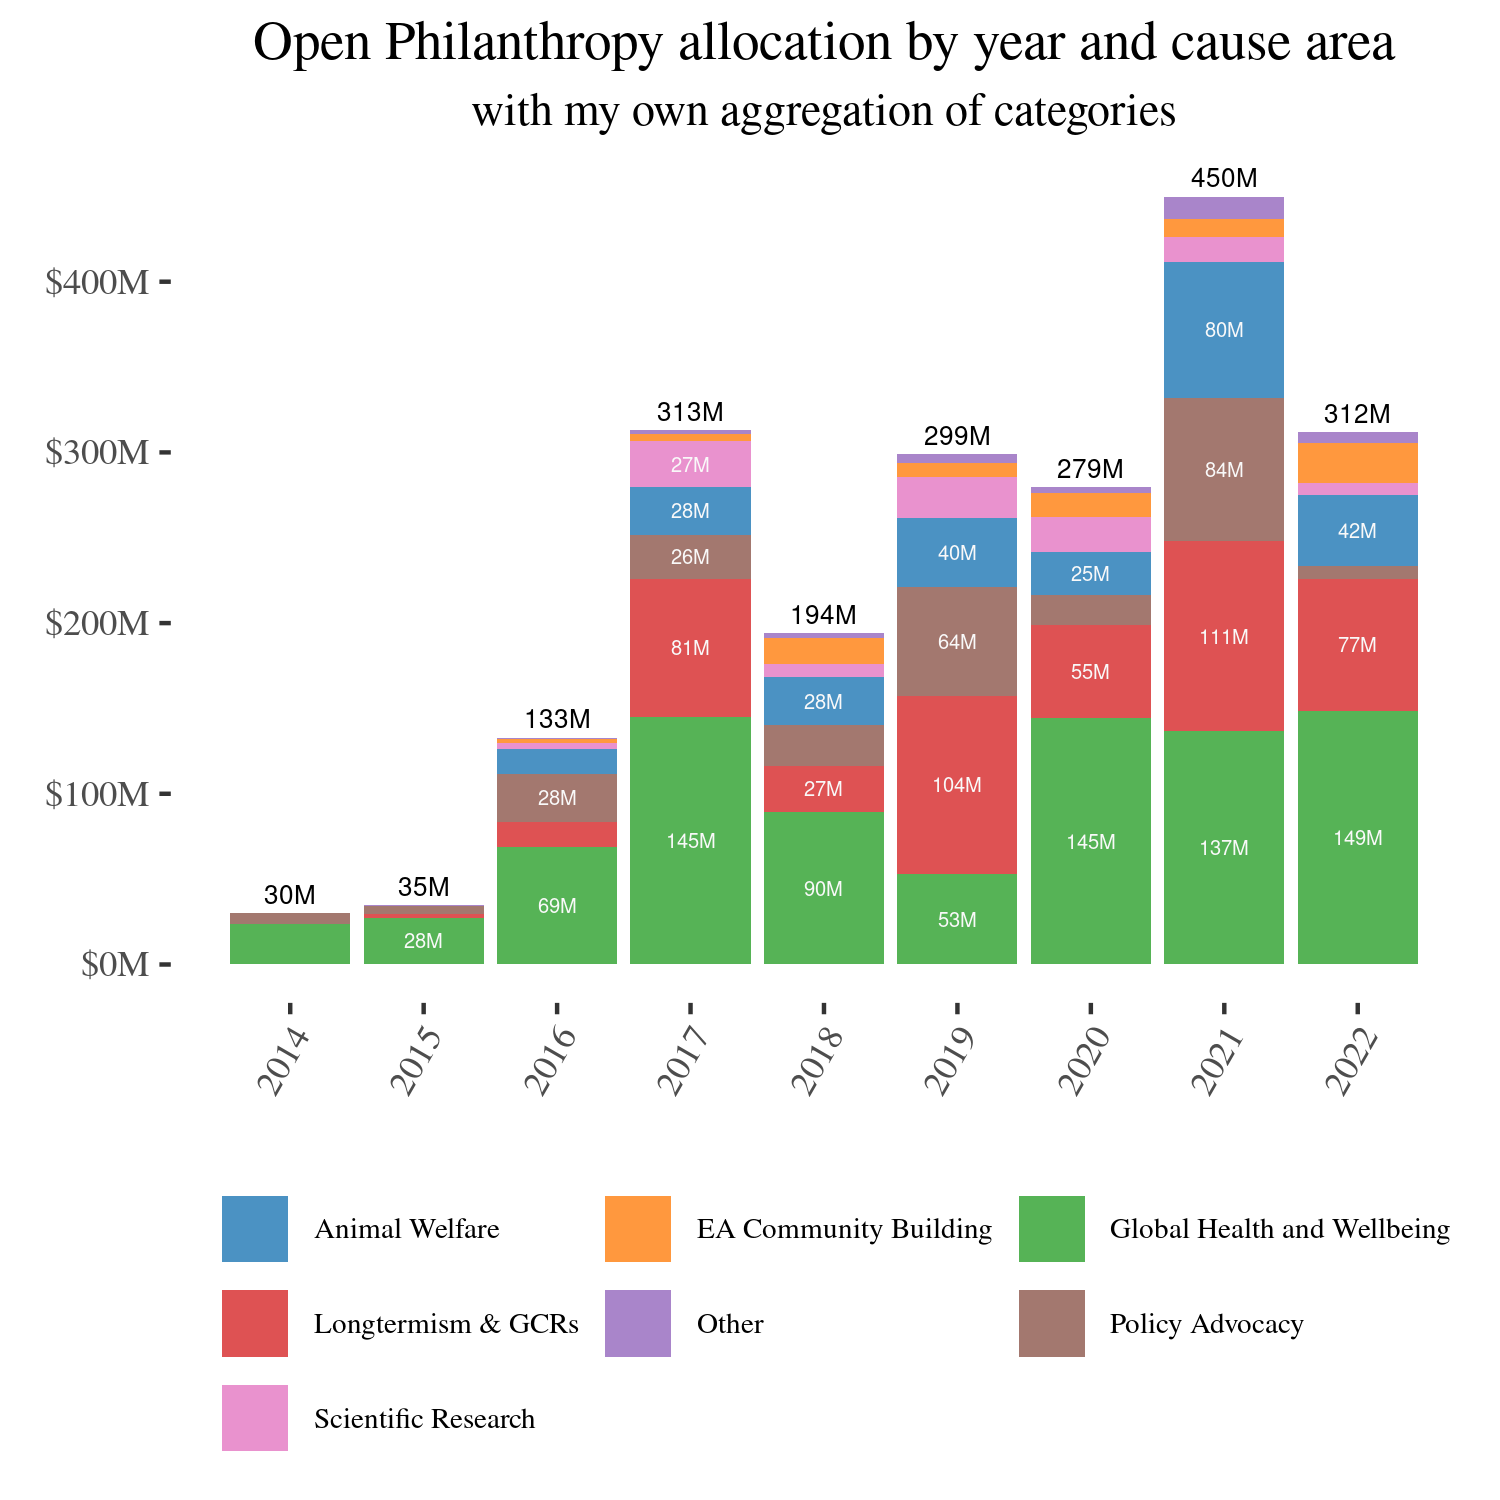 Bar graph of OpenPhil allocation by year. Global health leads for most years. Catastrophic risks are usually second since 2017. Overall spend increases over time.